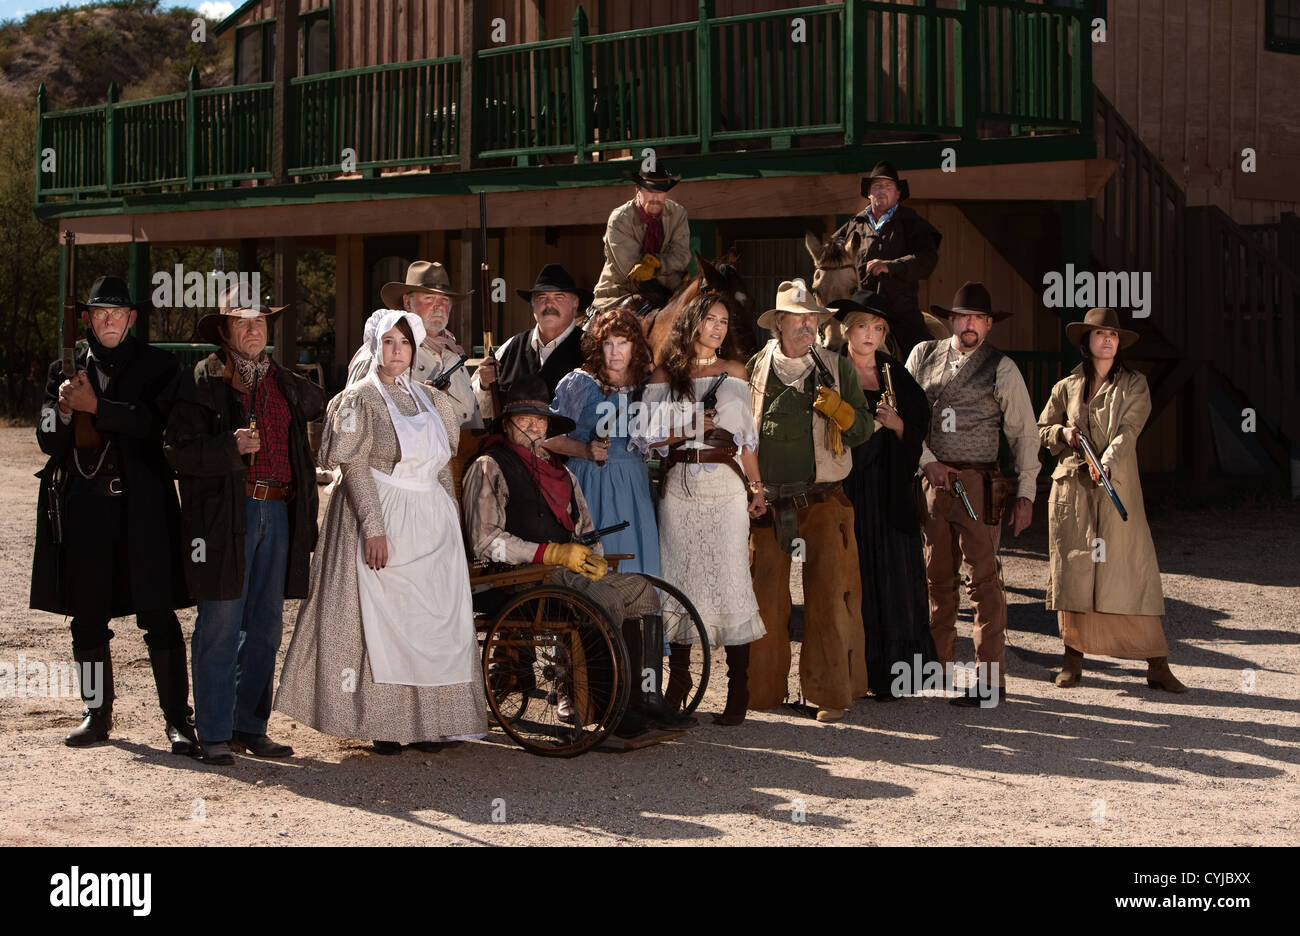 Townspeople posing outside in an American old west scene Stock Photo